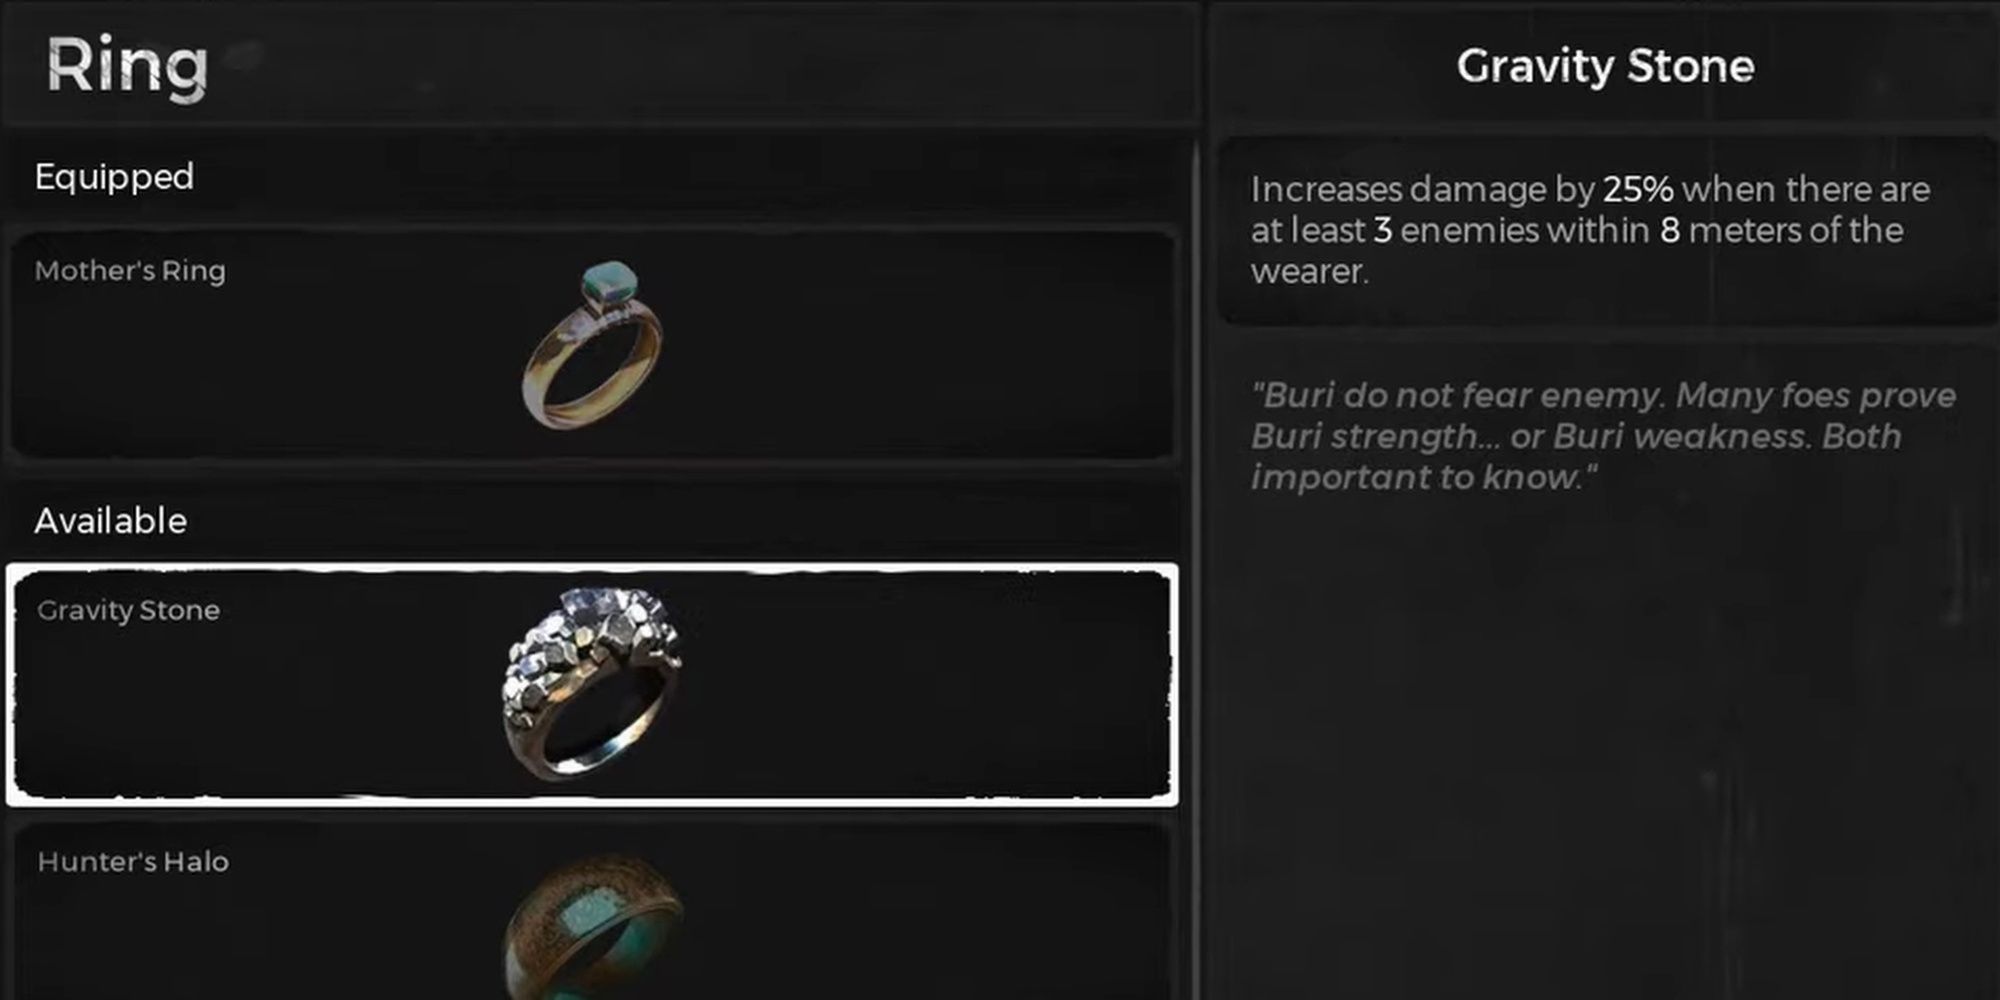 Remnant From The Ashes: The Gravity Stone Ring Item Description